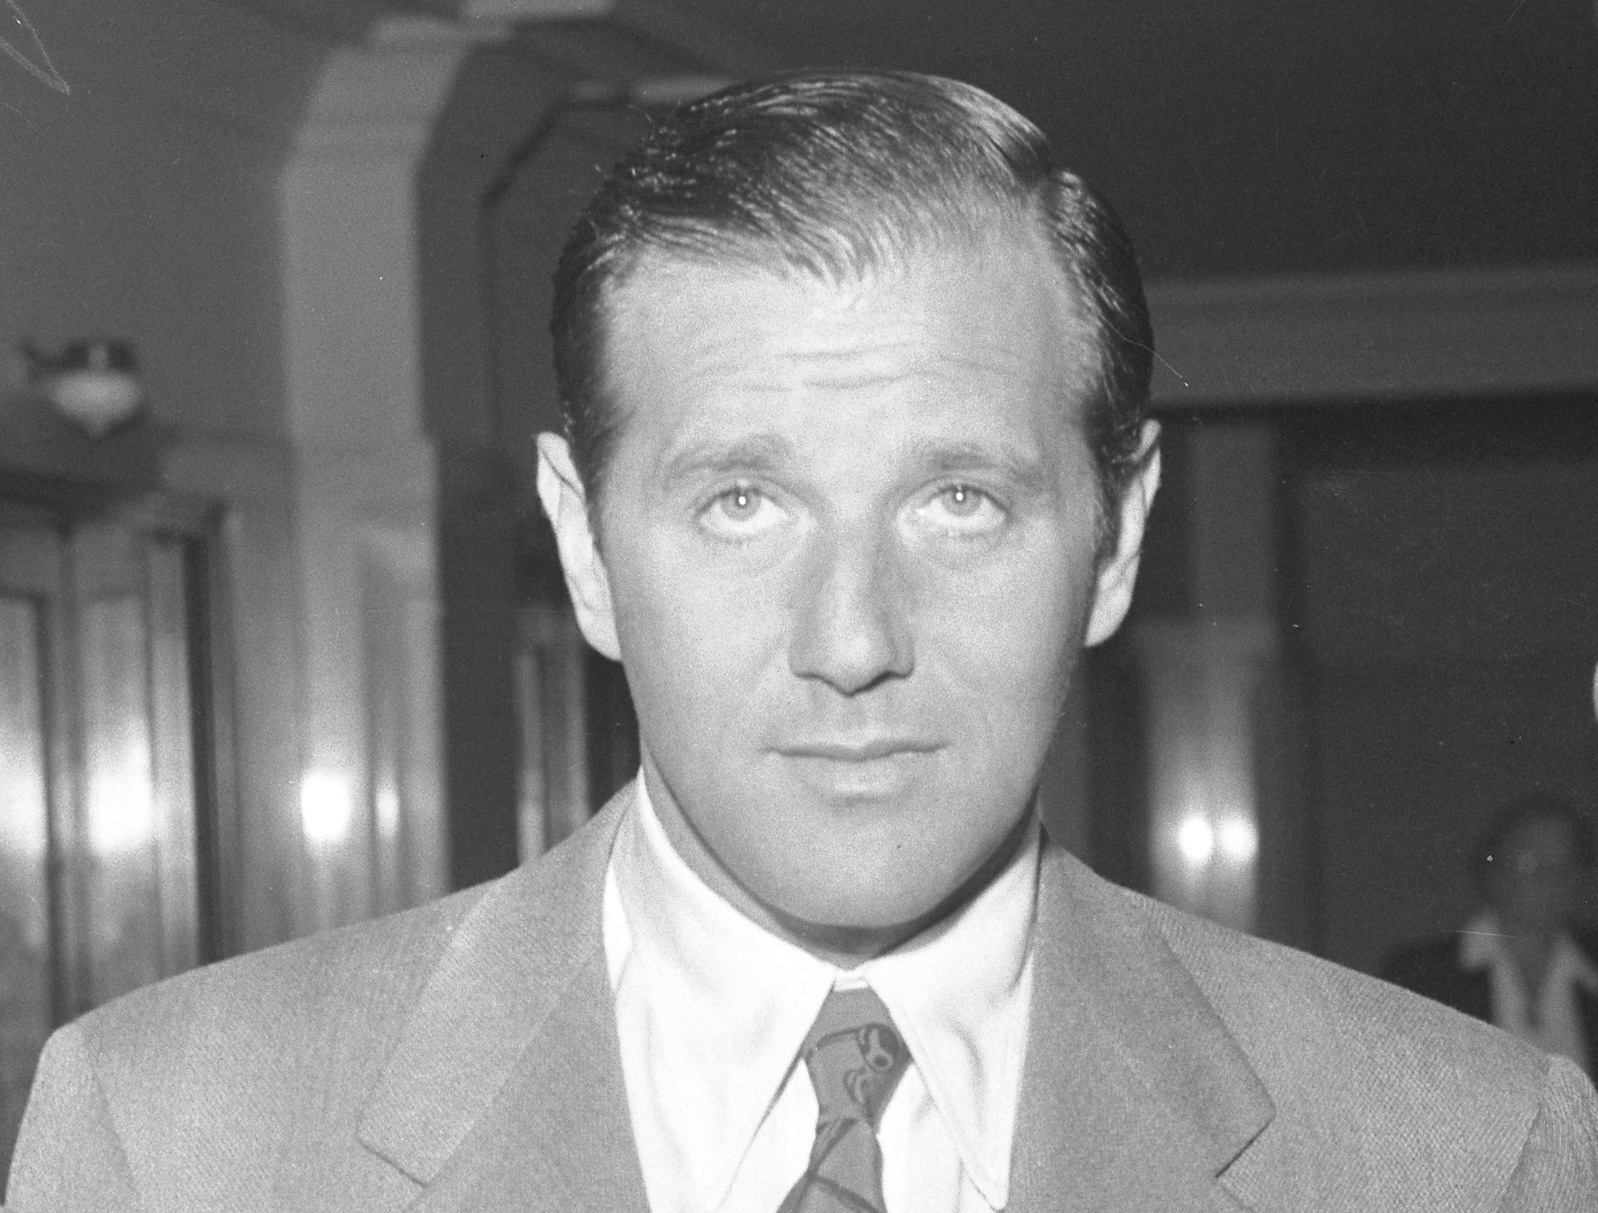 Benjamin "Bugsy" Siegel near the end of his life